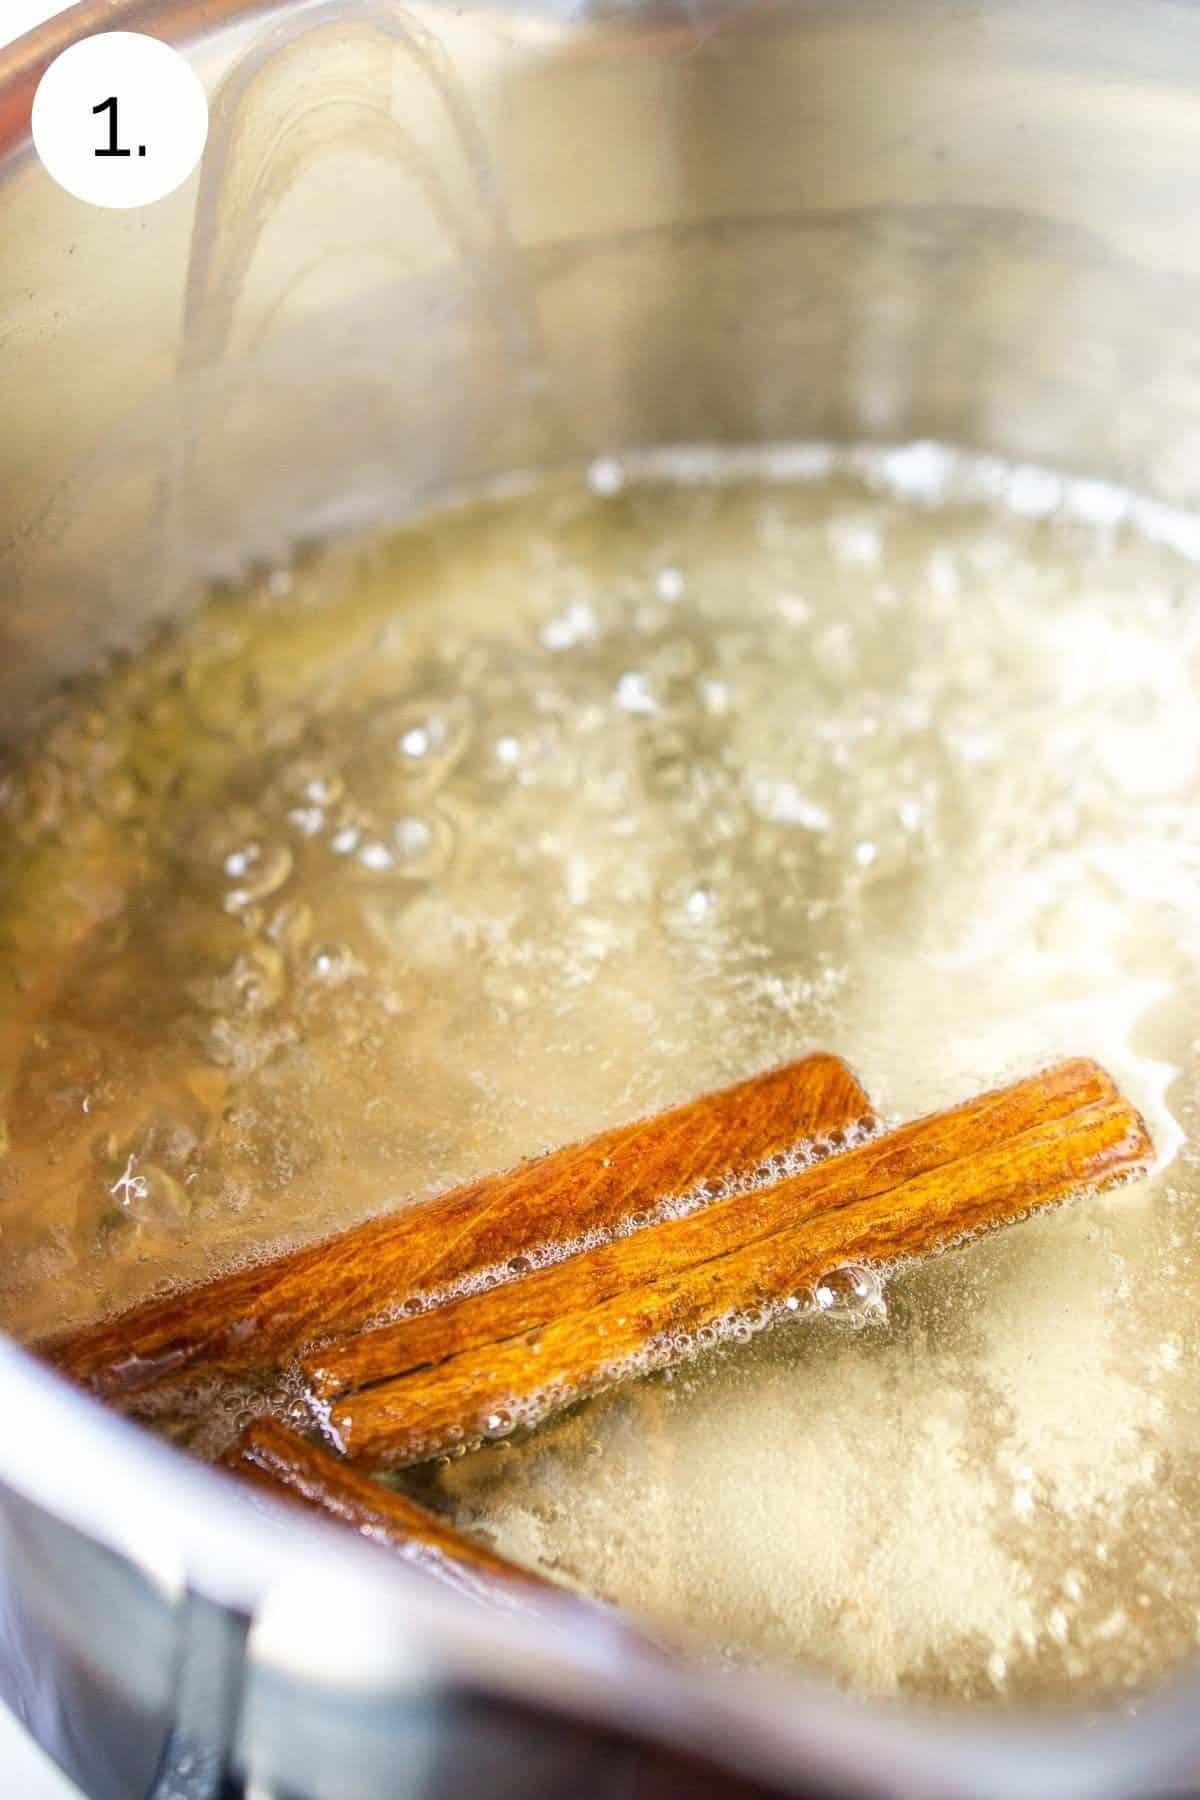 Bringing the cinnamon simple syrup to a boil in a small saucepan.